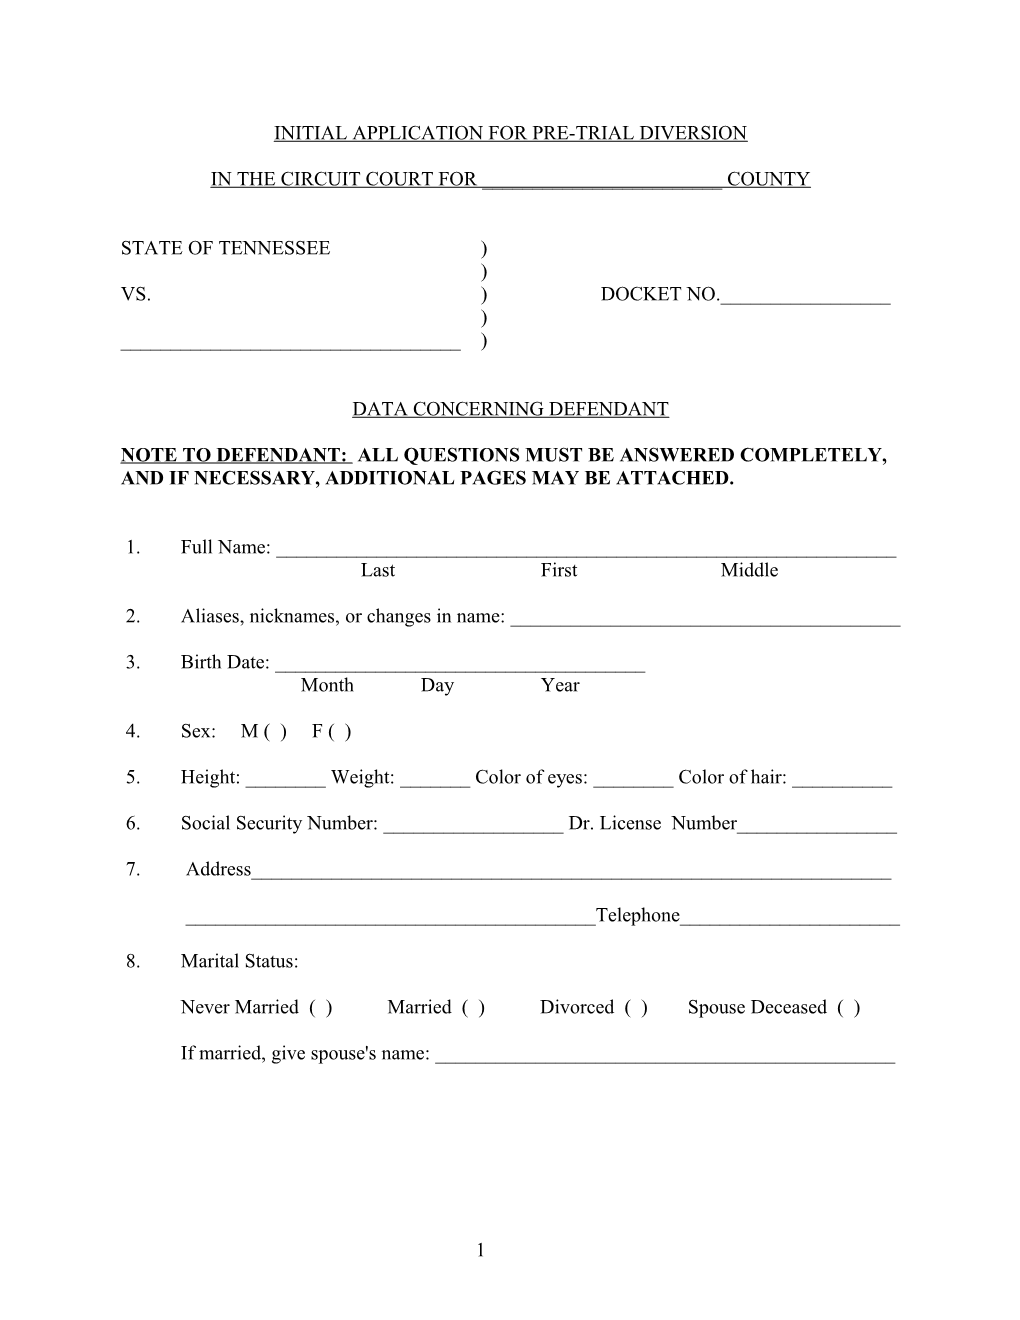 Initial Application for Pre-Trial Diversion